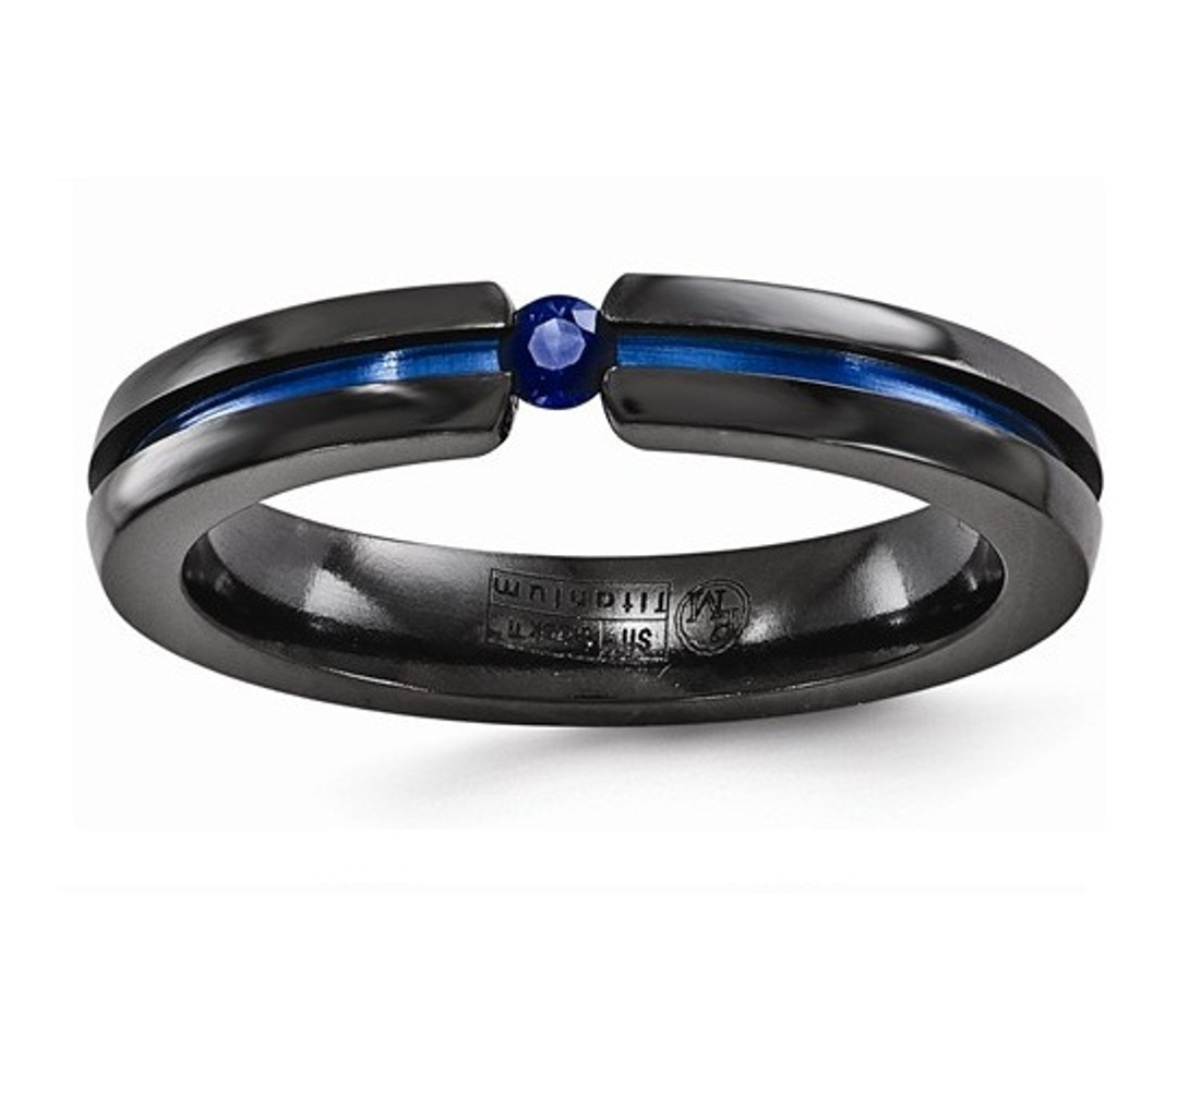  Black Ti Sapphire And Blue Anodized 4mm Band